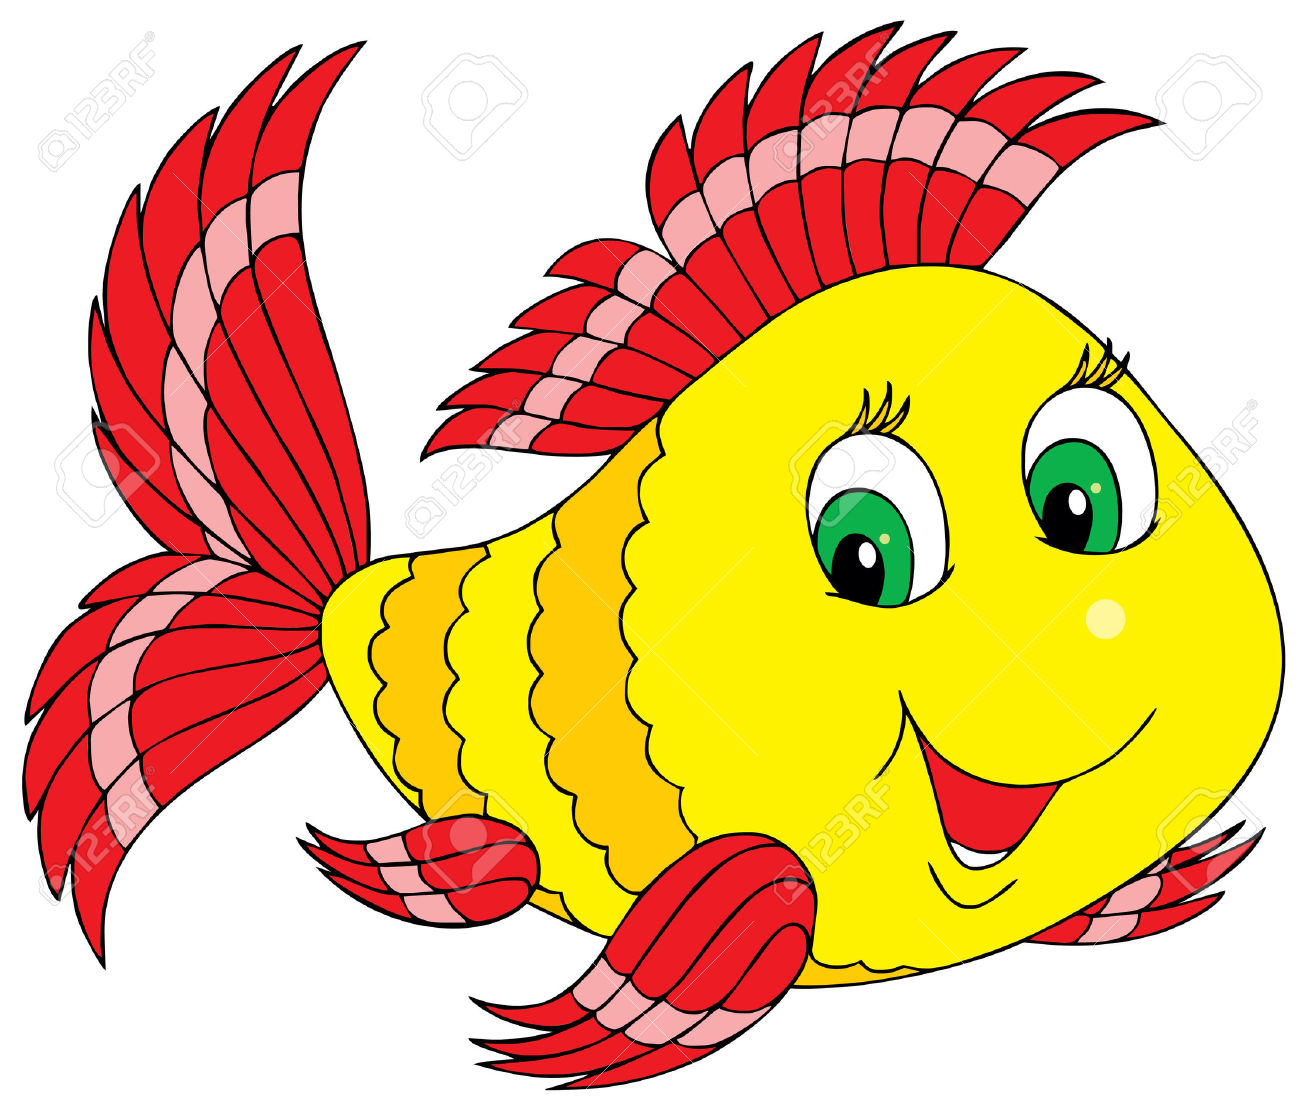 Blue fish fish clip art free - Fishes Clipart